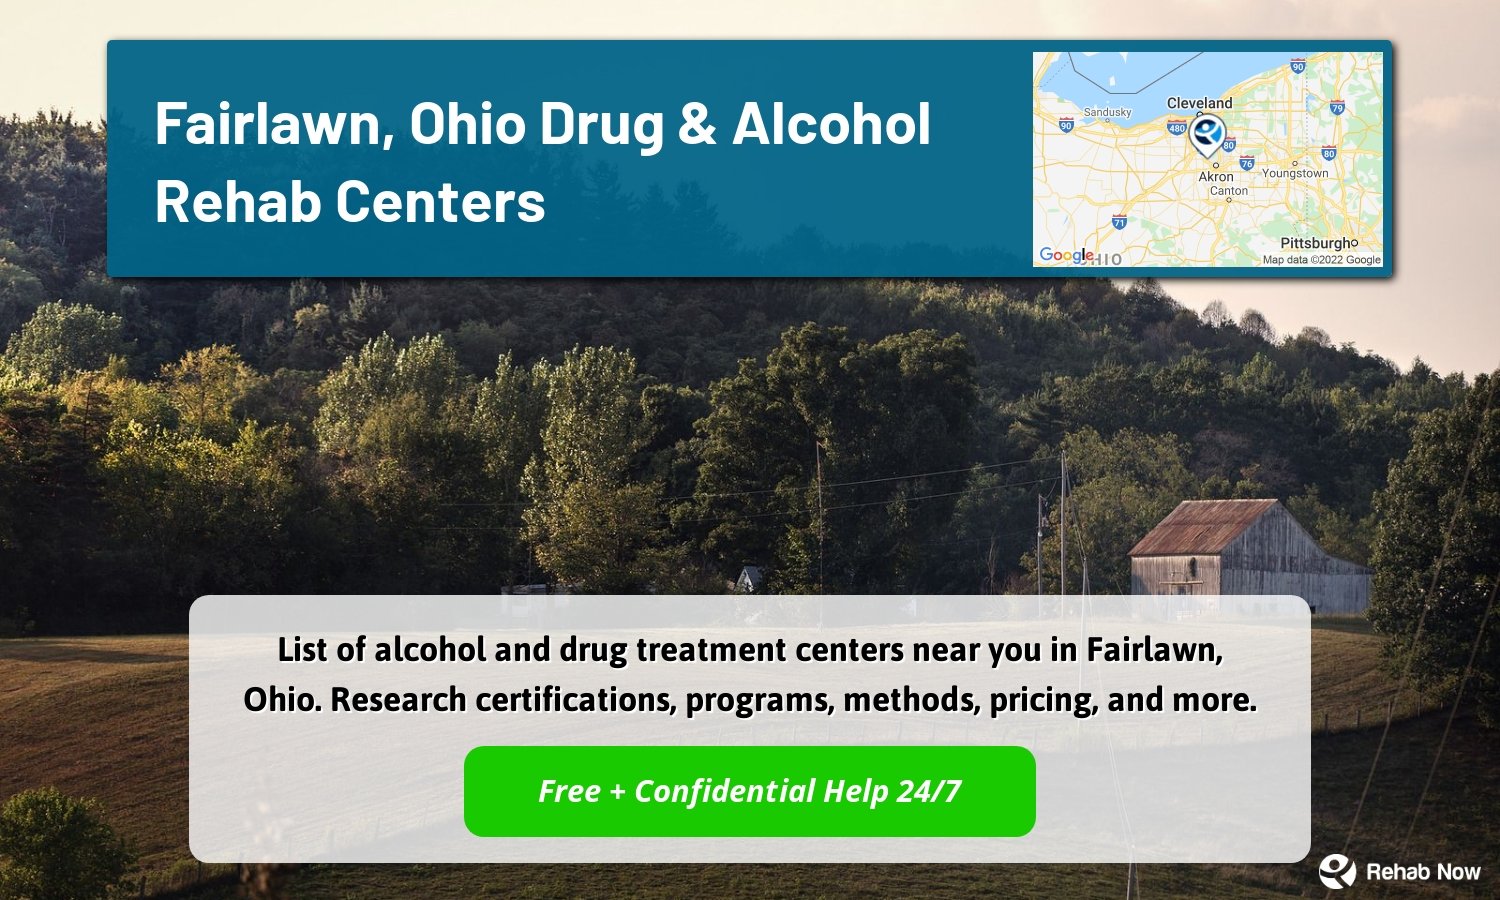 List of alcohol and drug treatment centers near you in Fairlawn, Ohio. Research certifications, programs, methods, pricing, and more.